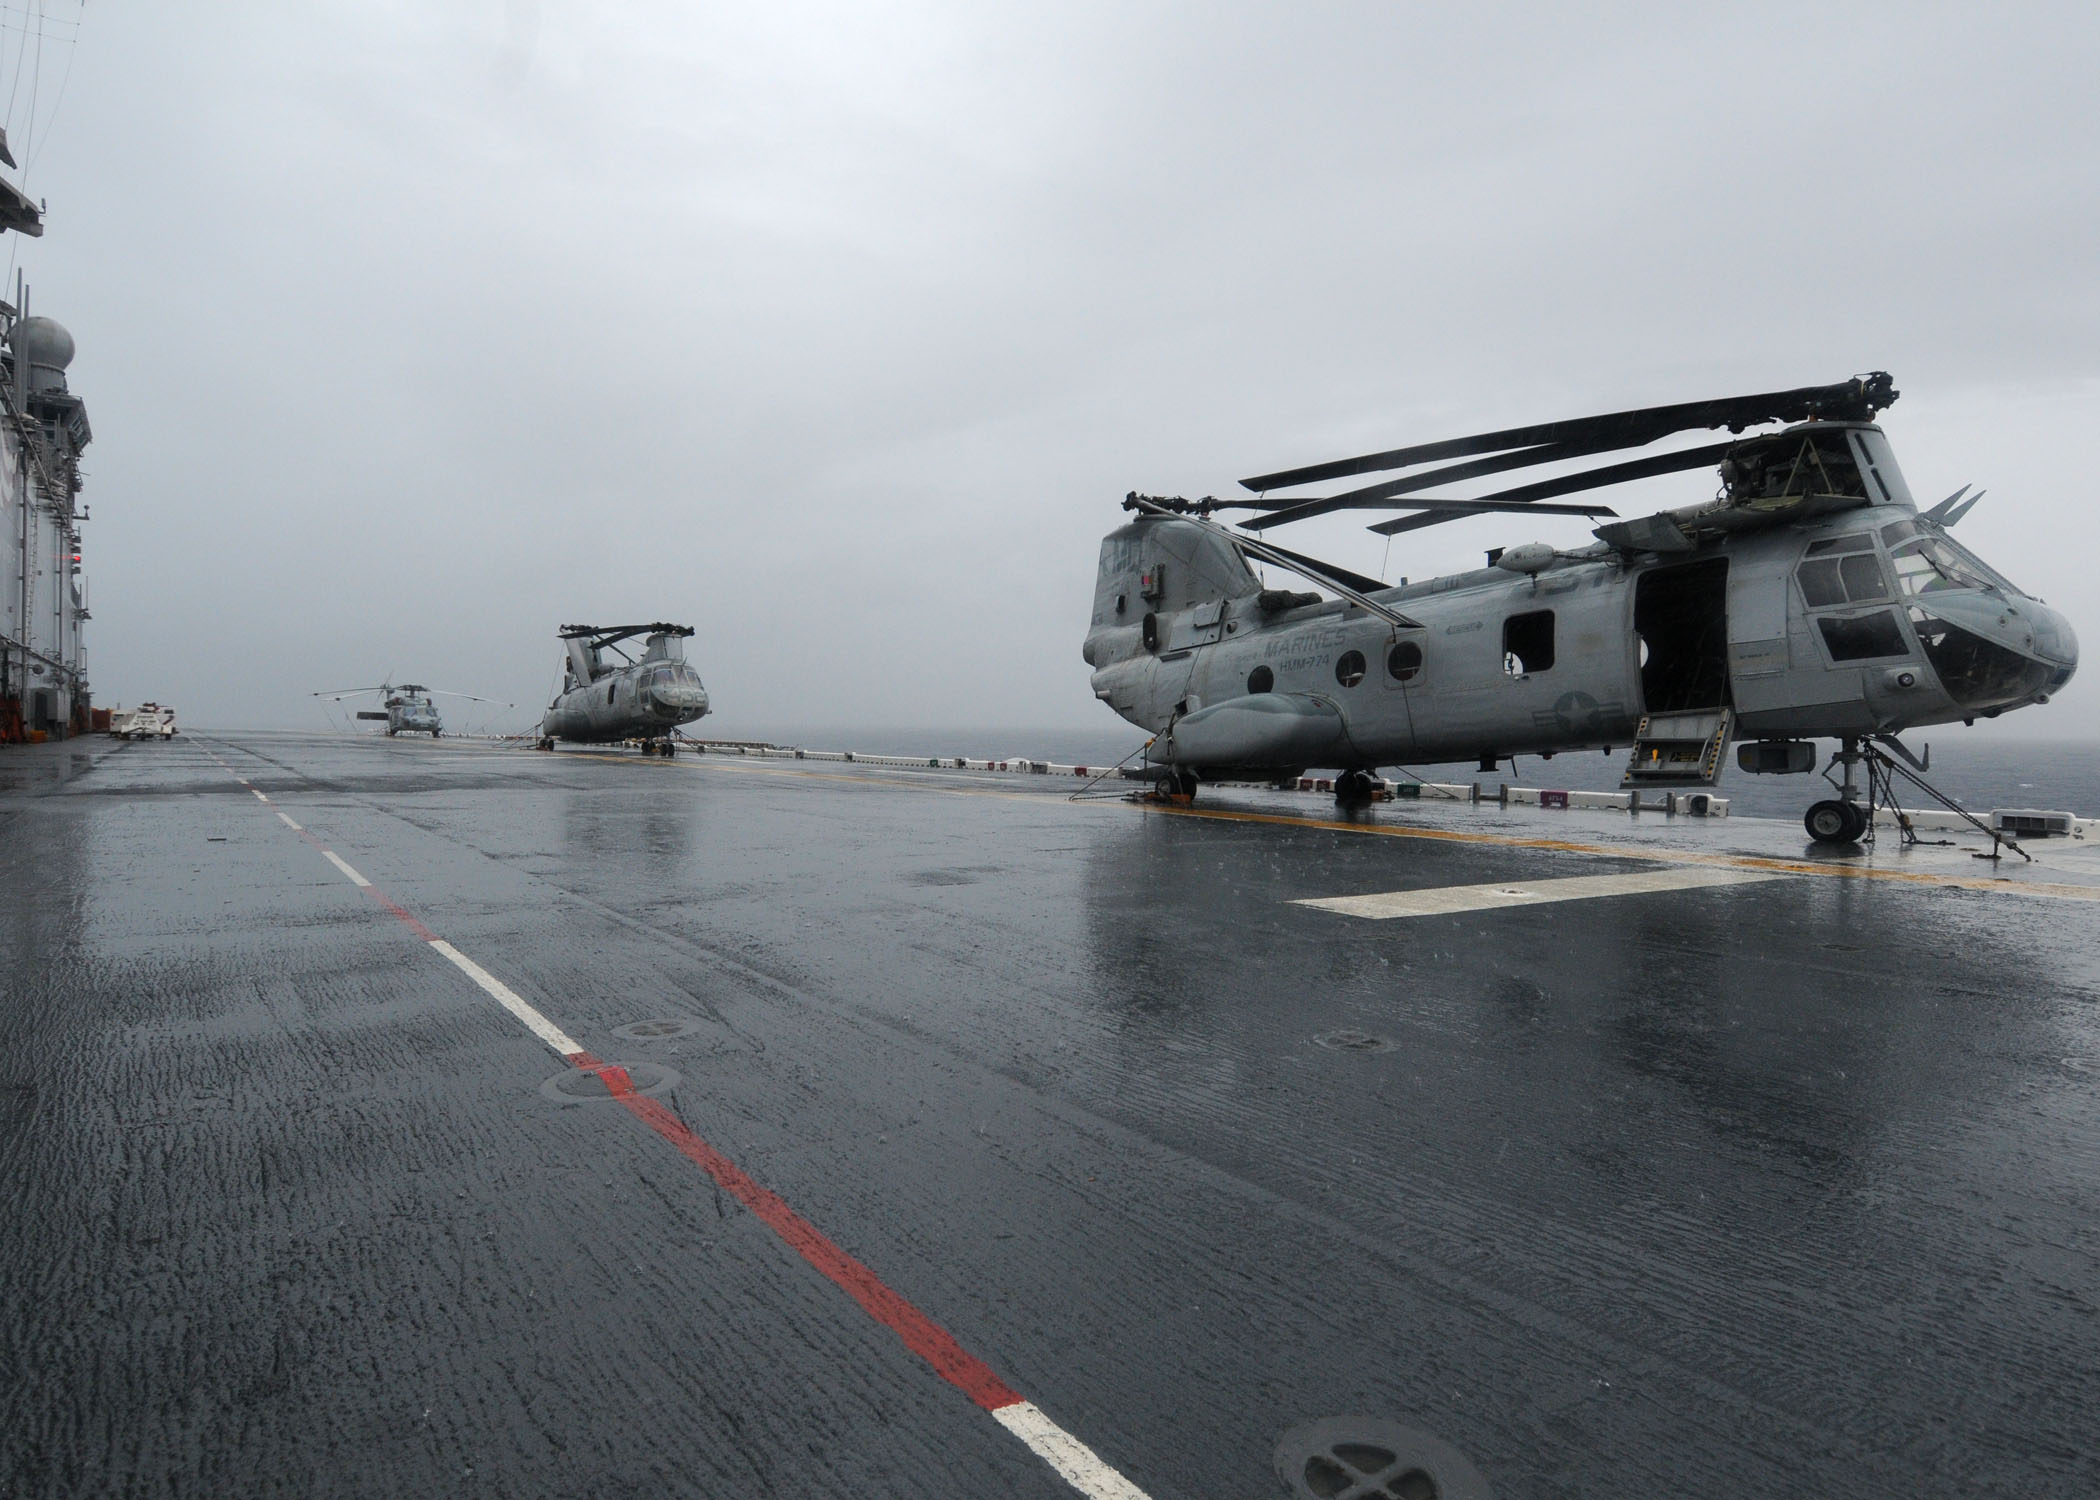 US Navy 101105-N-3265K-034 CH-46E helicopters are secured on the flight deck of the multi-purpose amphibious assault ship USS Iwo Jima (LHD 7)